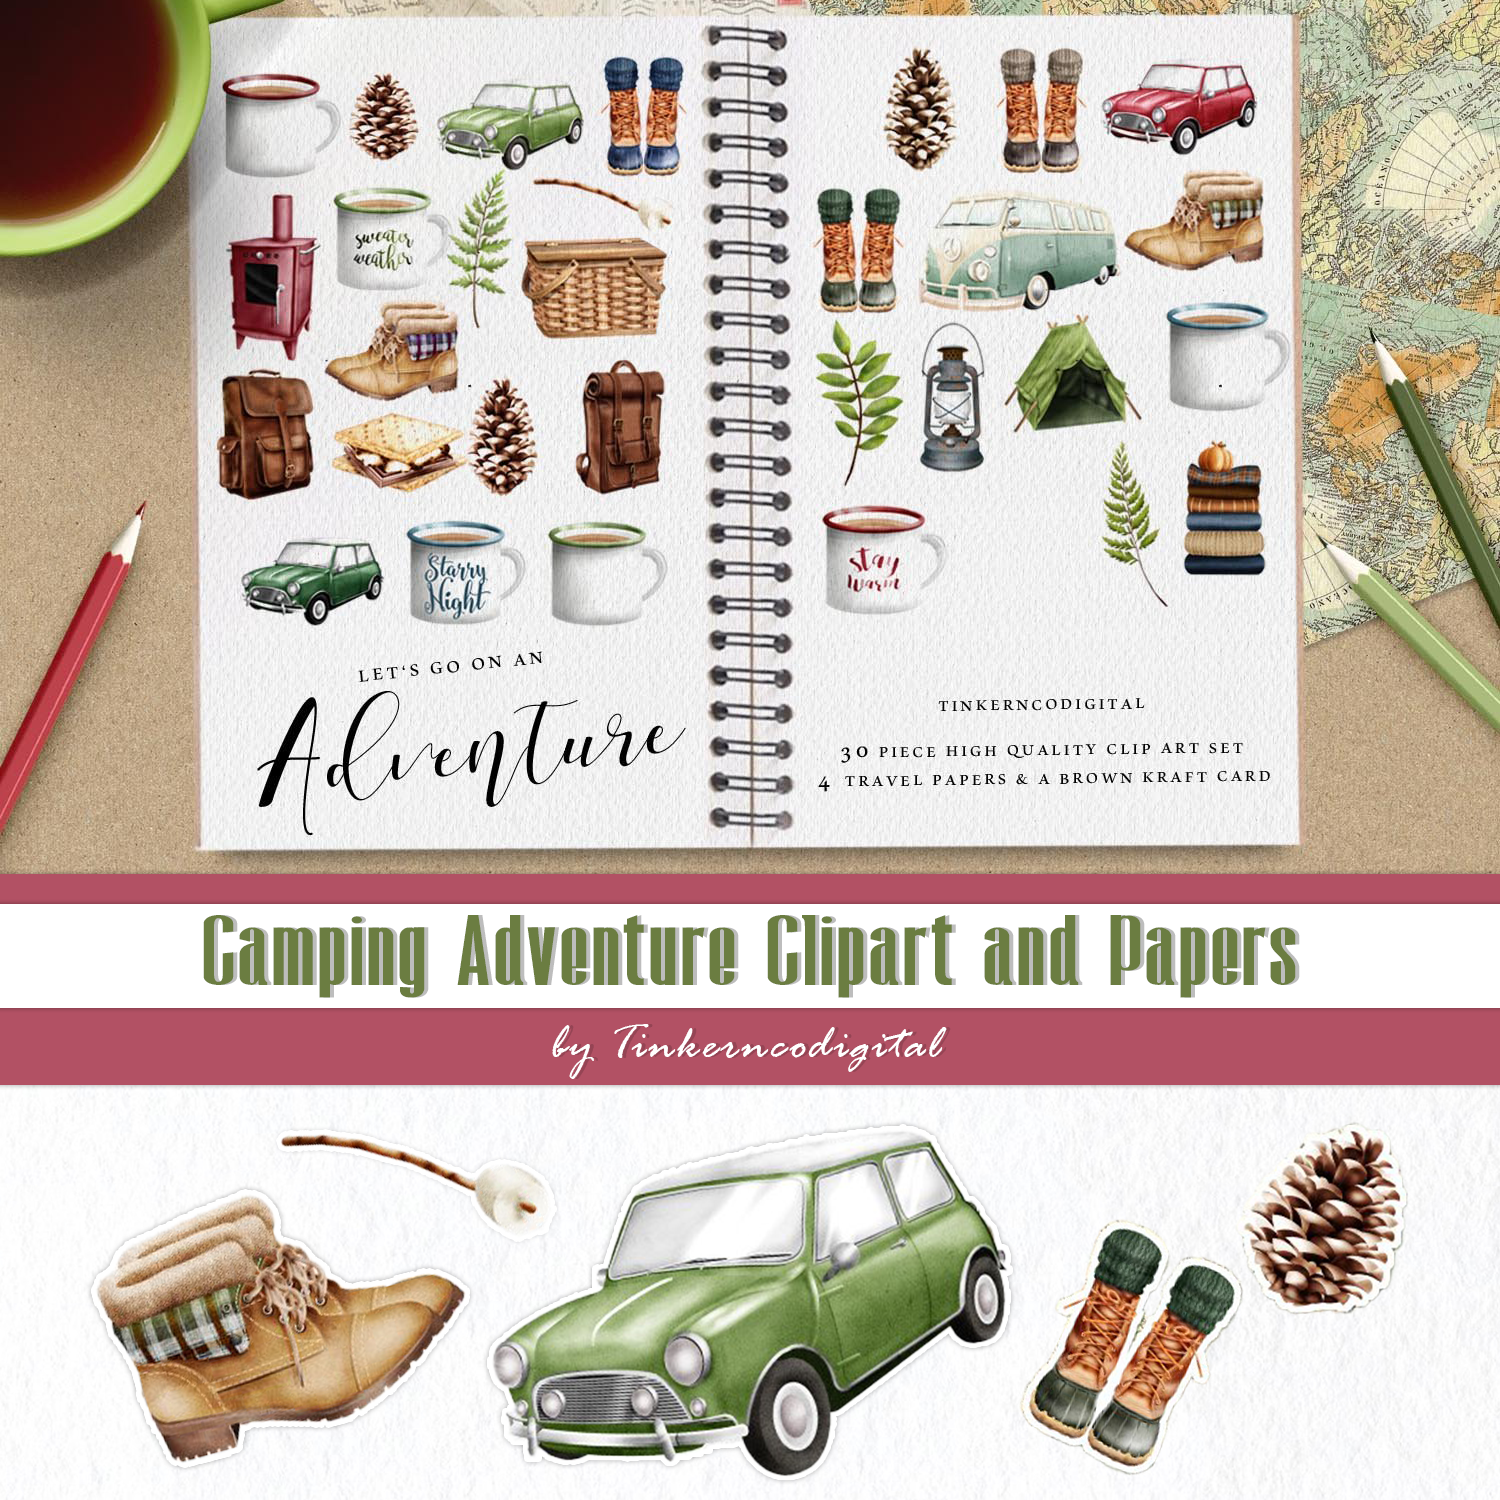 Preview camping adventure clipart and papers.